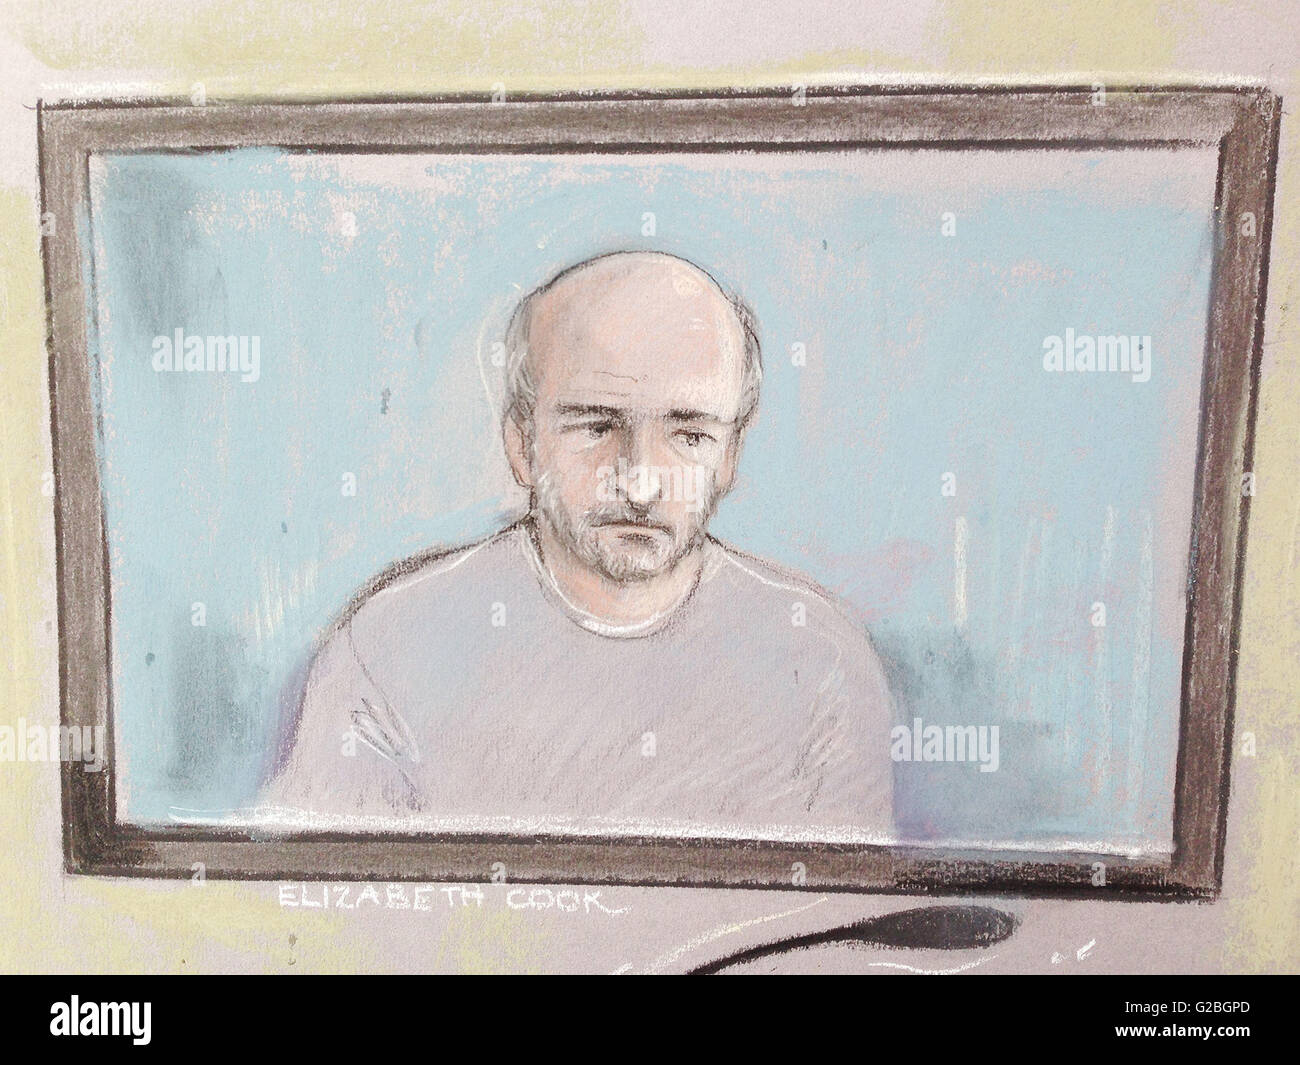 File court artist sketch by Elizabeth Cook dated 04/02/16 of Edward Tenniswood who is accused of killing 20-year-old India Chipchase, is due to stand trial in July. Stock Photo